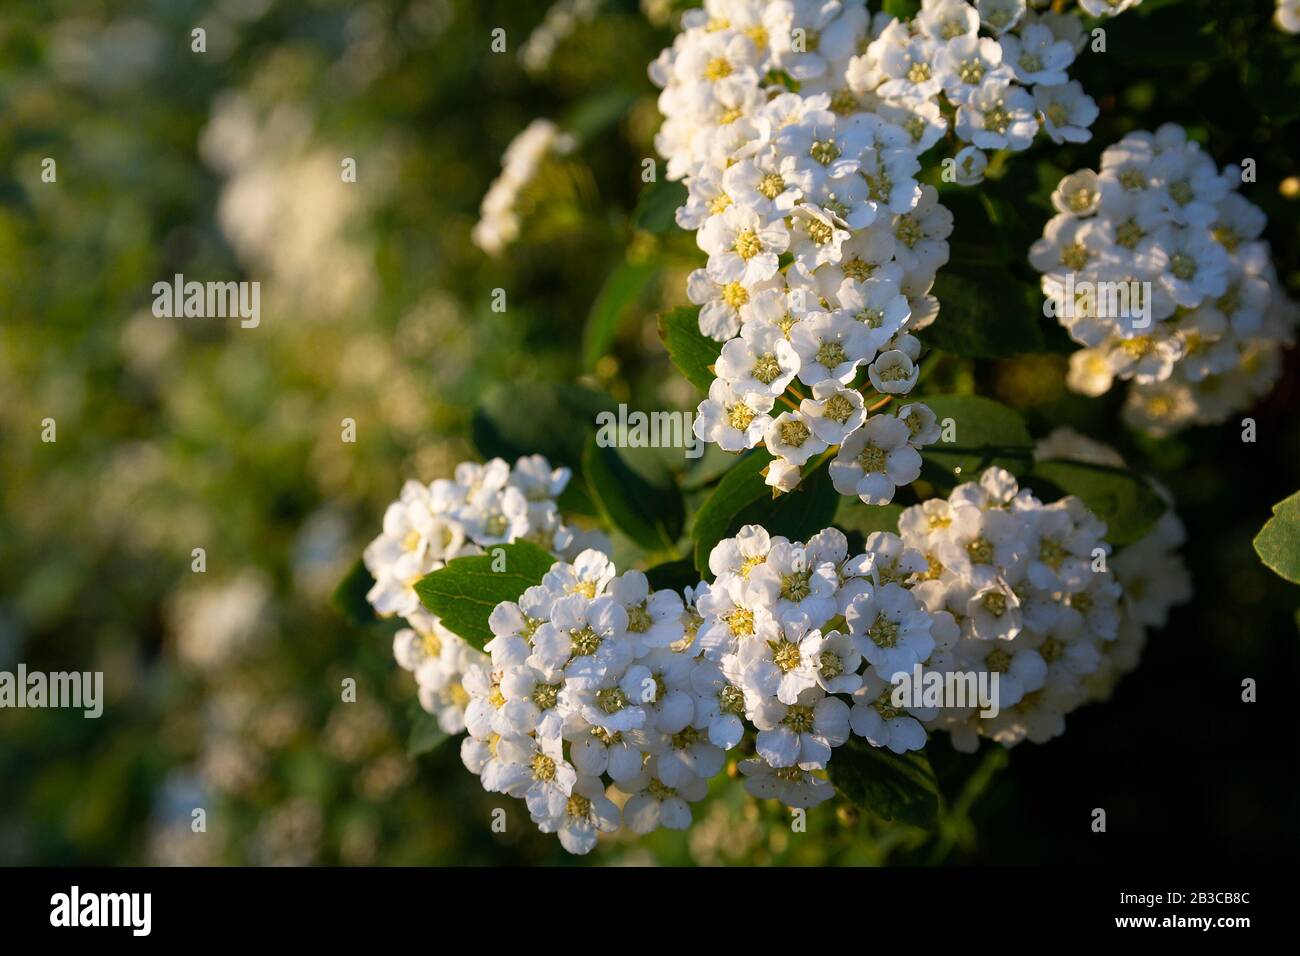 Spirea flowers and green sheets are illuminated by sunlight. Nature Stock Photo